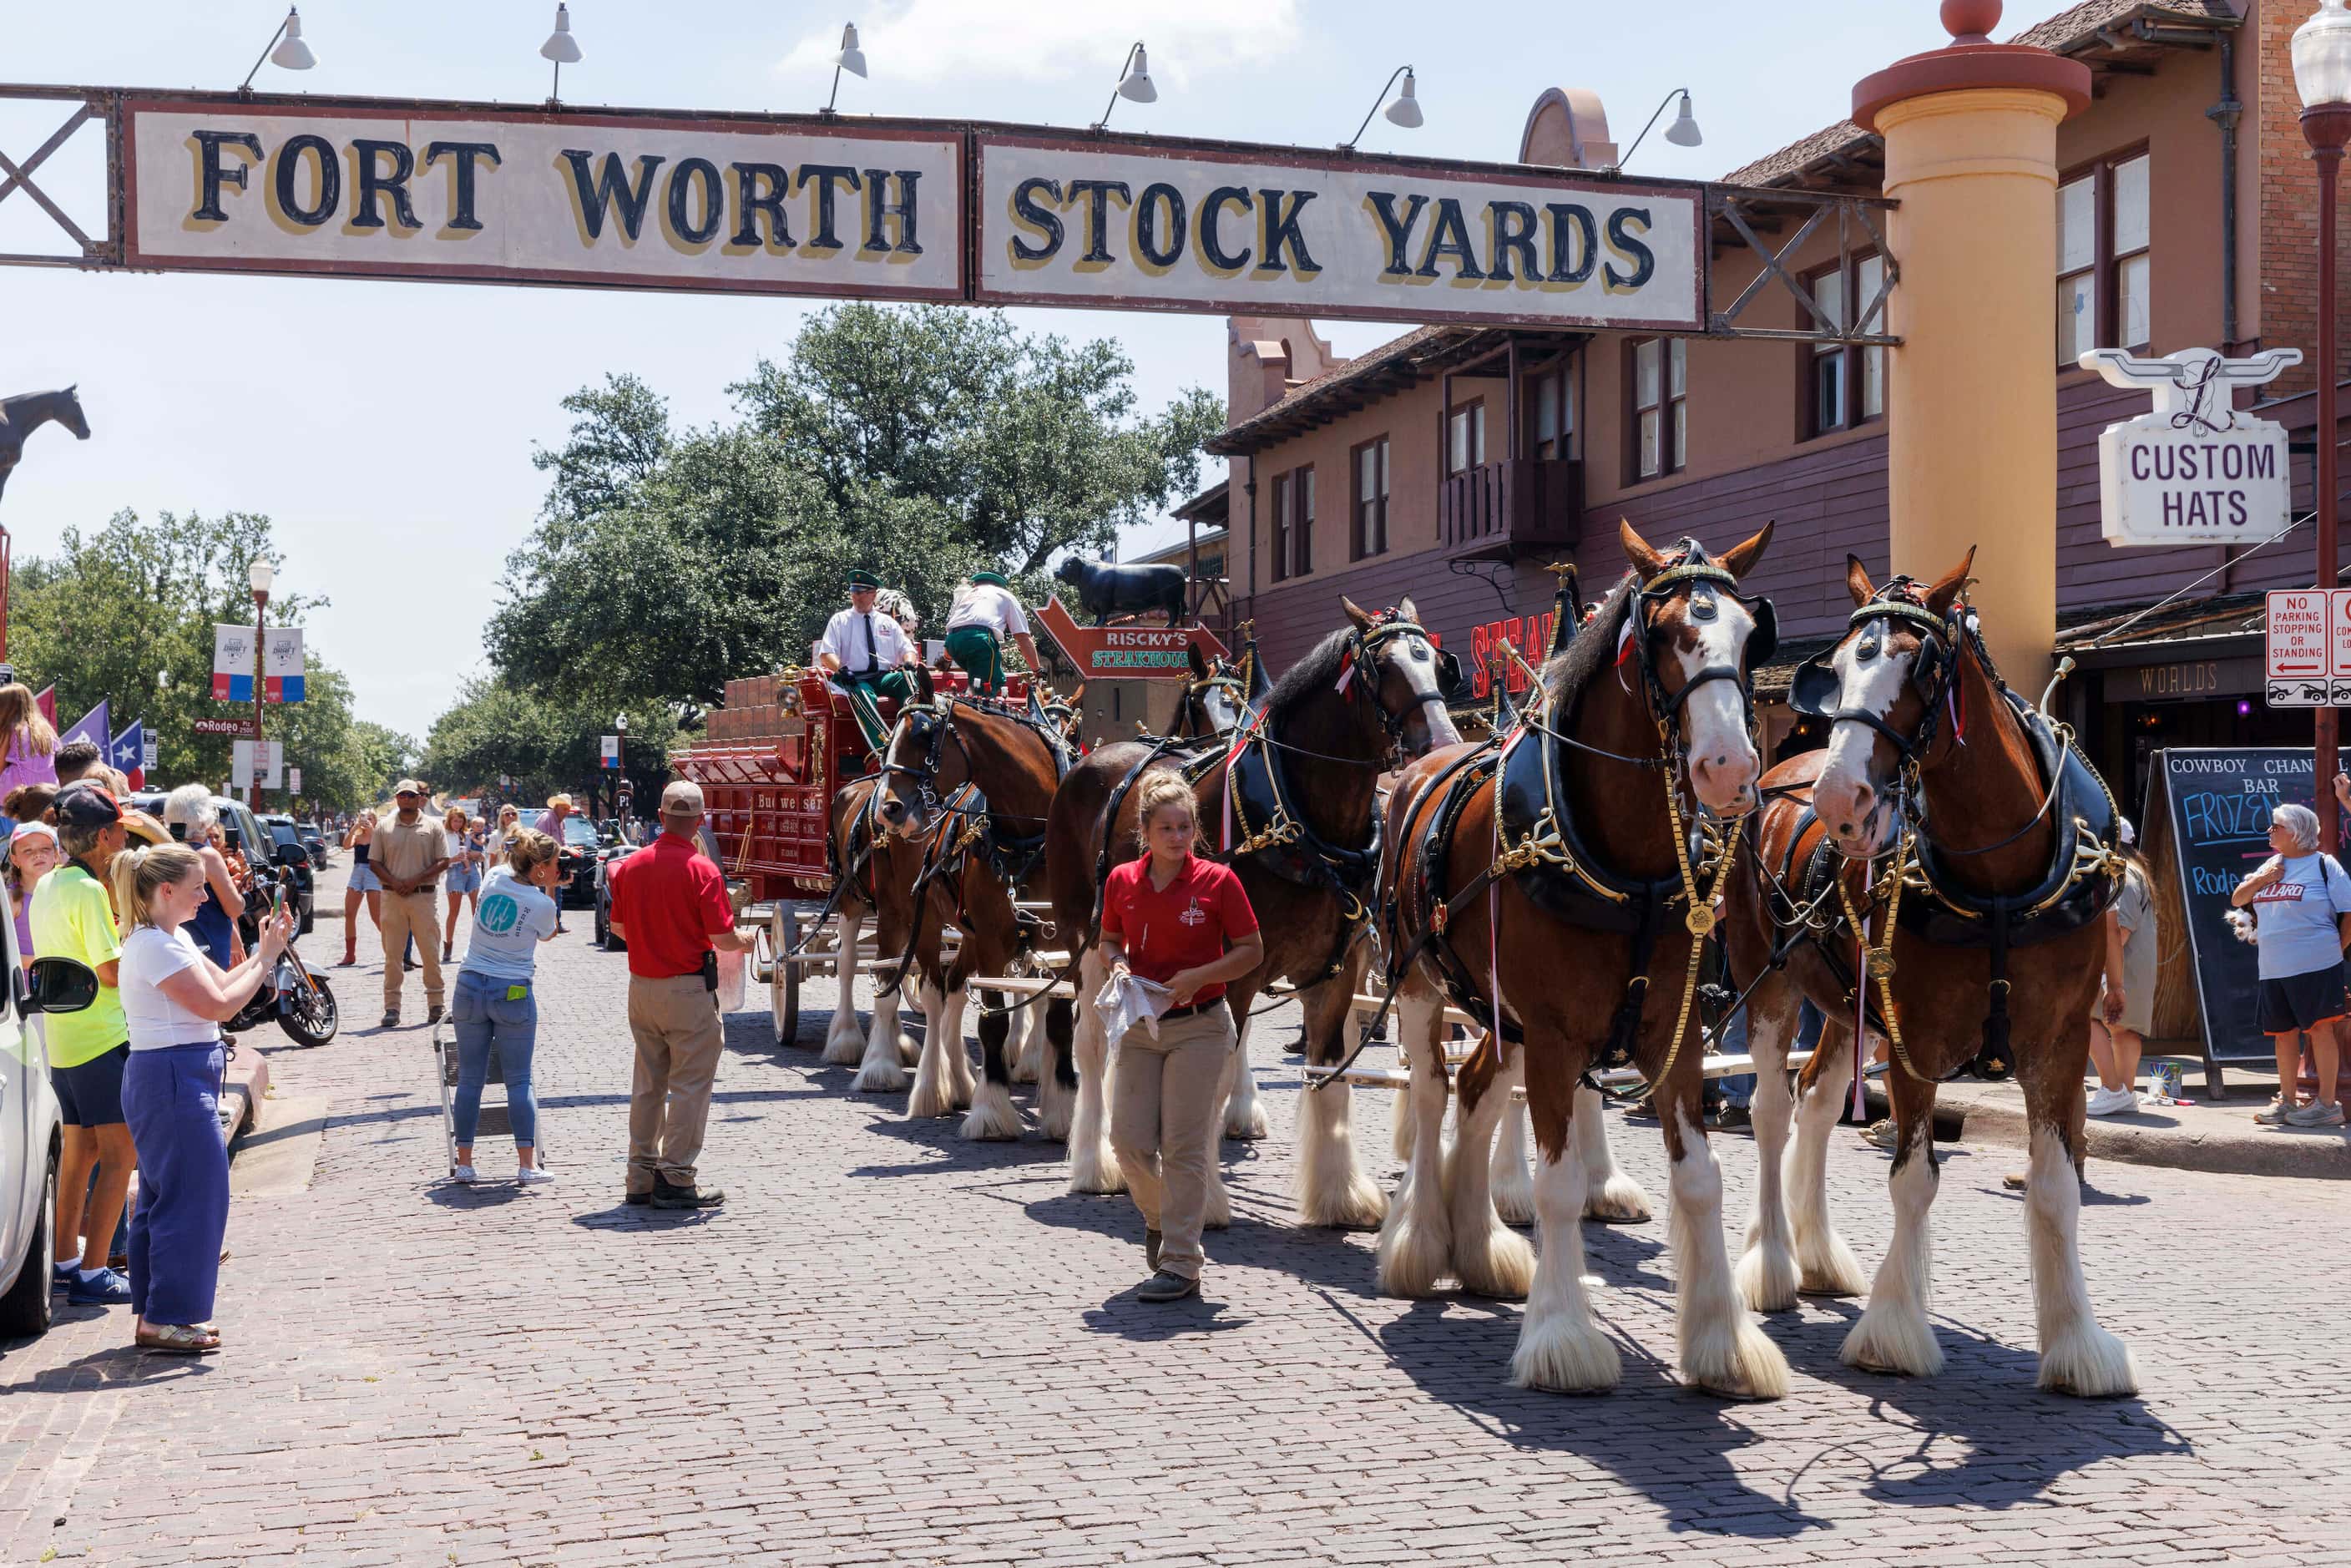 People gather along East Exchange in The Stockyards to see the Budweiser Clydesdales,...